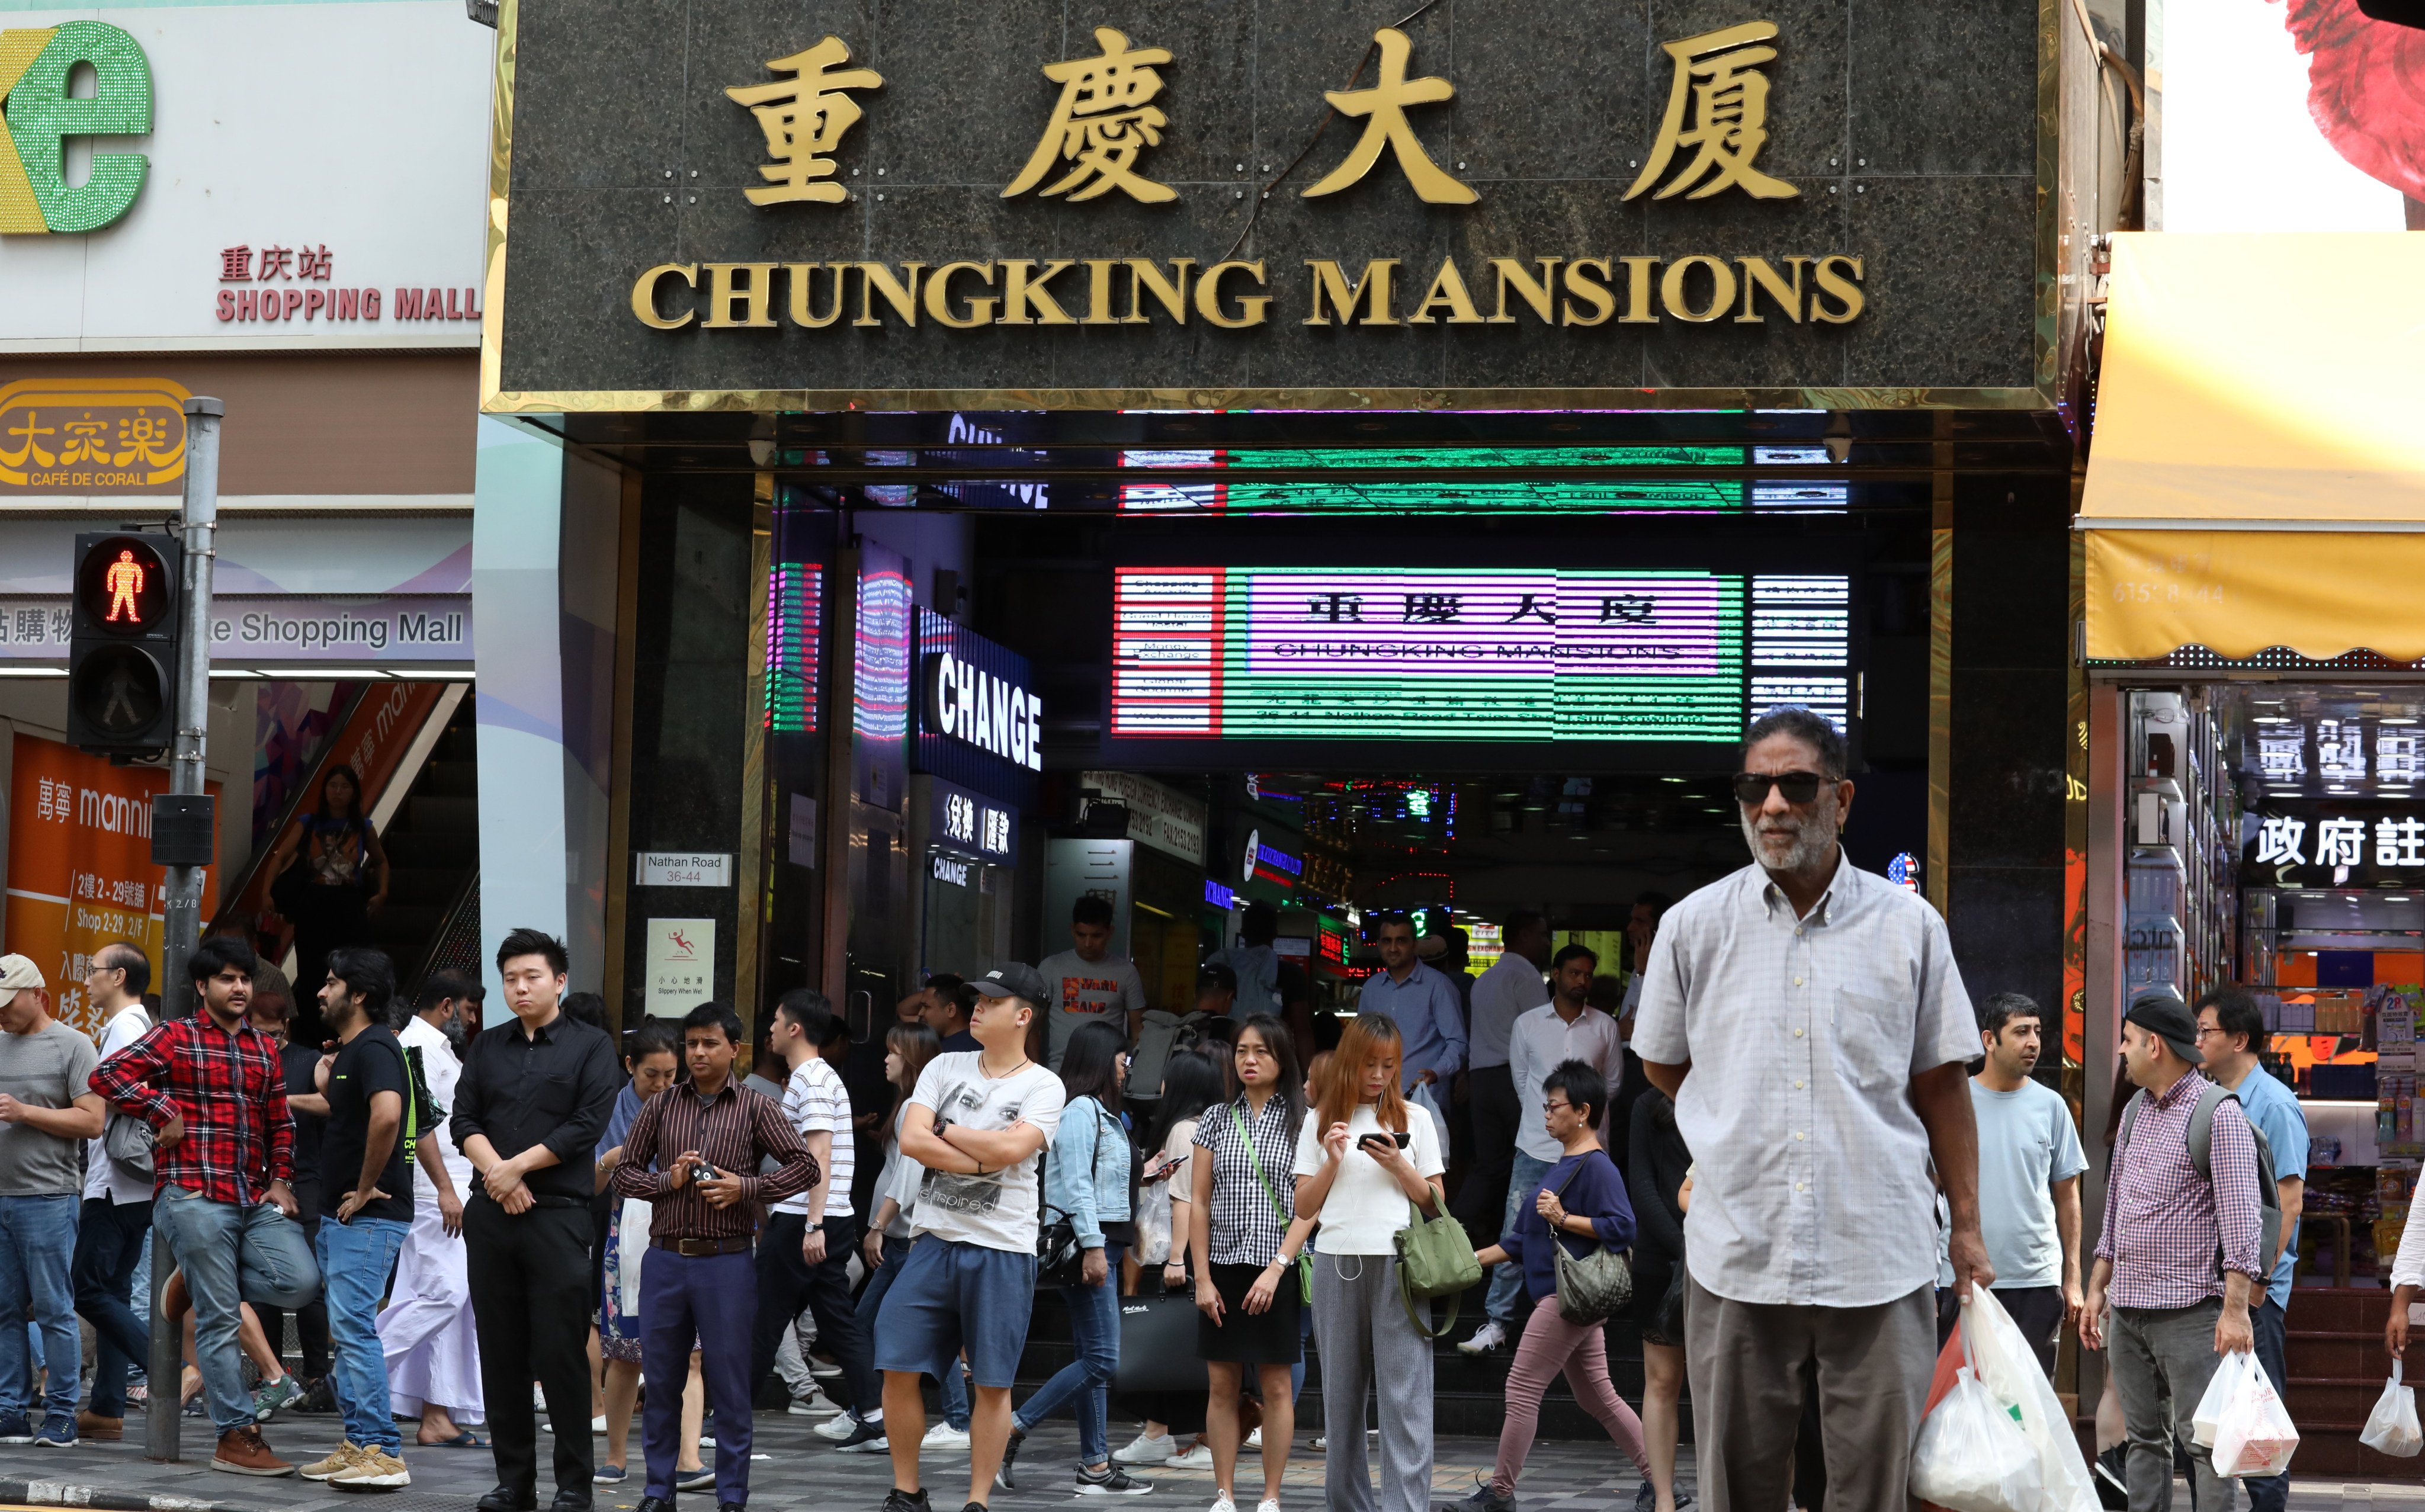 Chungking Mansions in Tsim Sha Tsui on October 25, 2019. We need to see members of Hong Kong’s ethnic minority community as tomorrow’s leaders, who need more equitable access to education and decent career options. Photo: Nora Tam